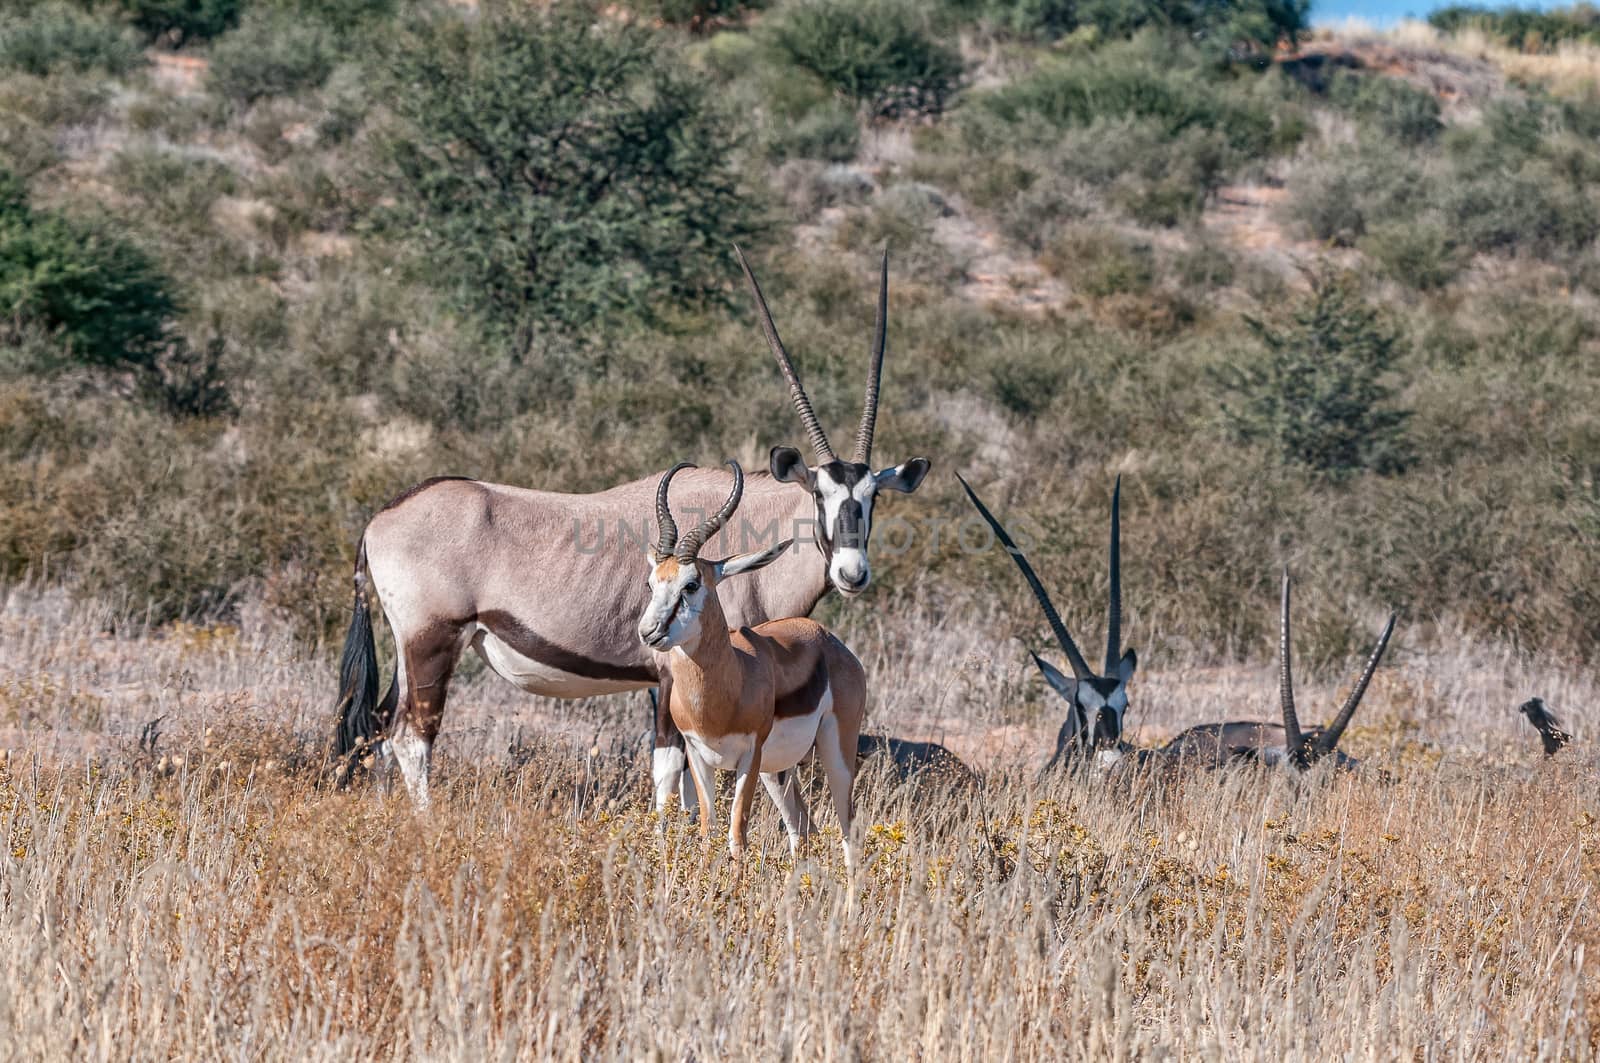 Oryx and a springbok between grass in the arid Kgalagadi